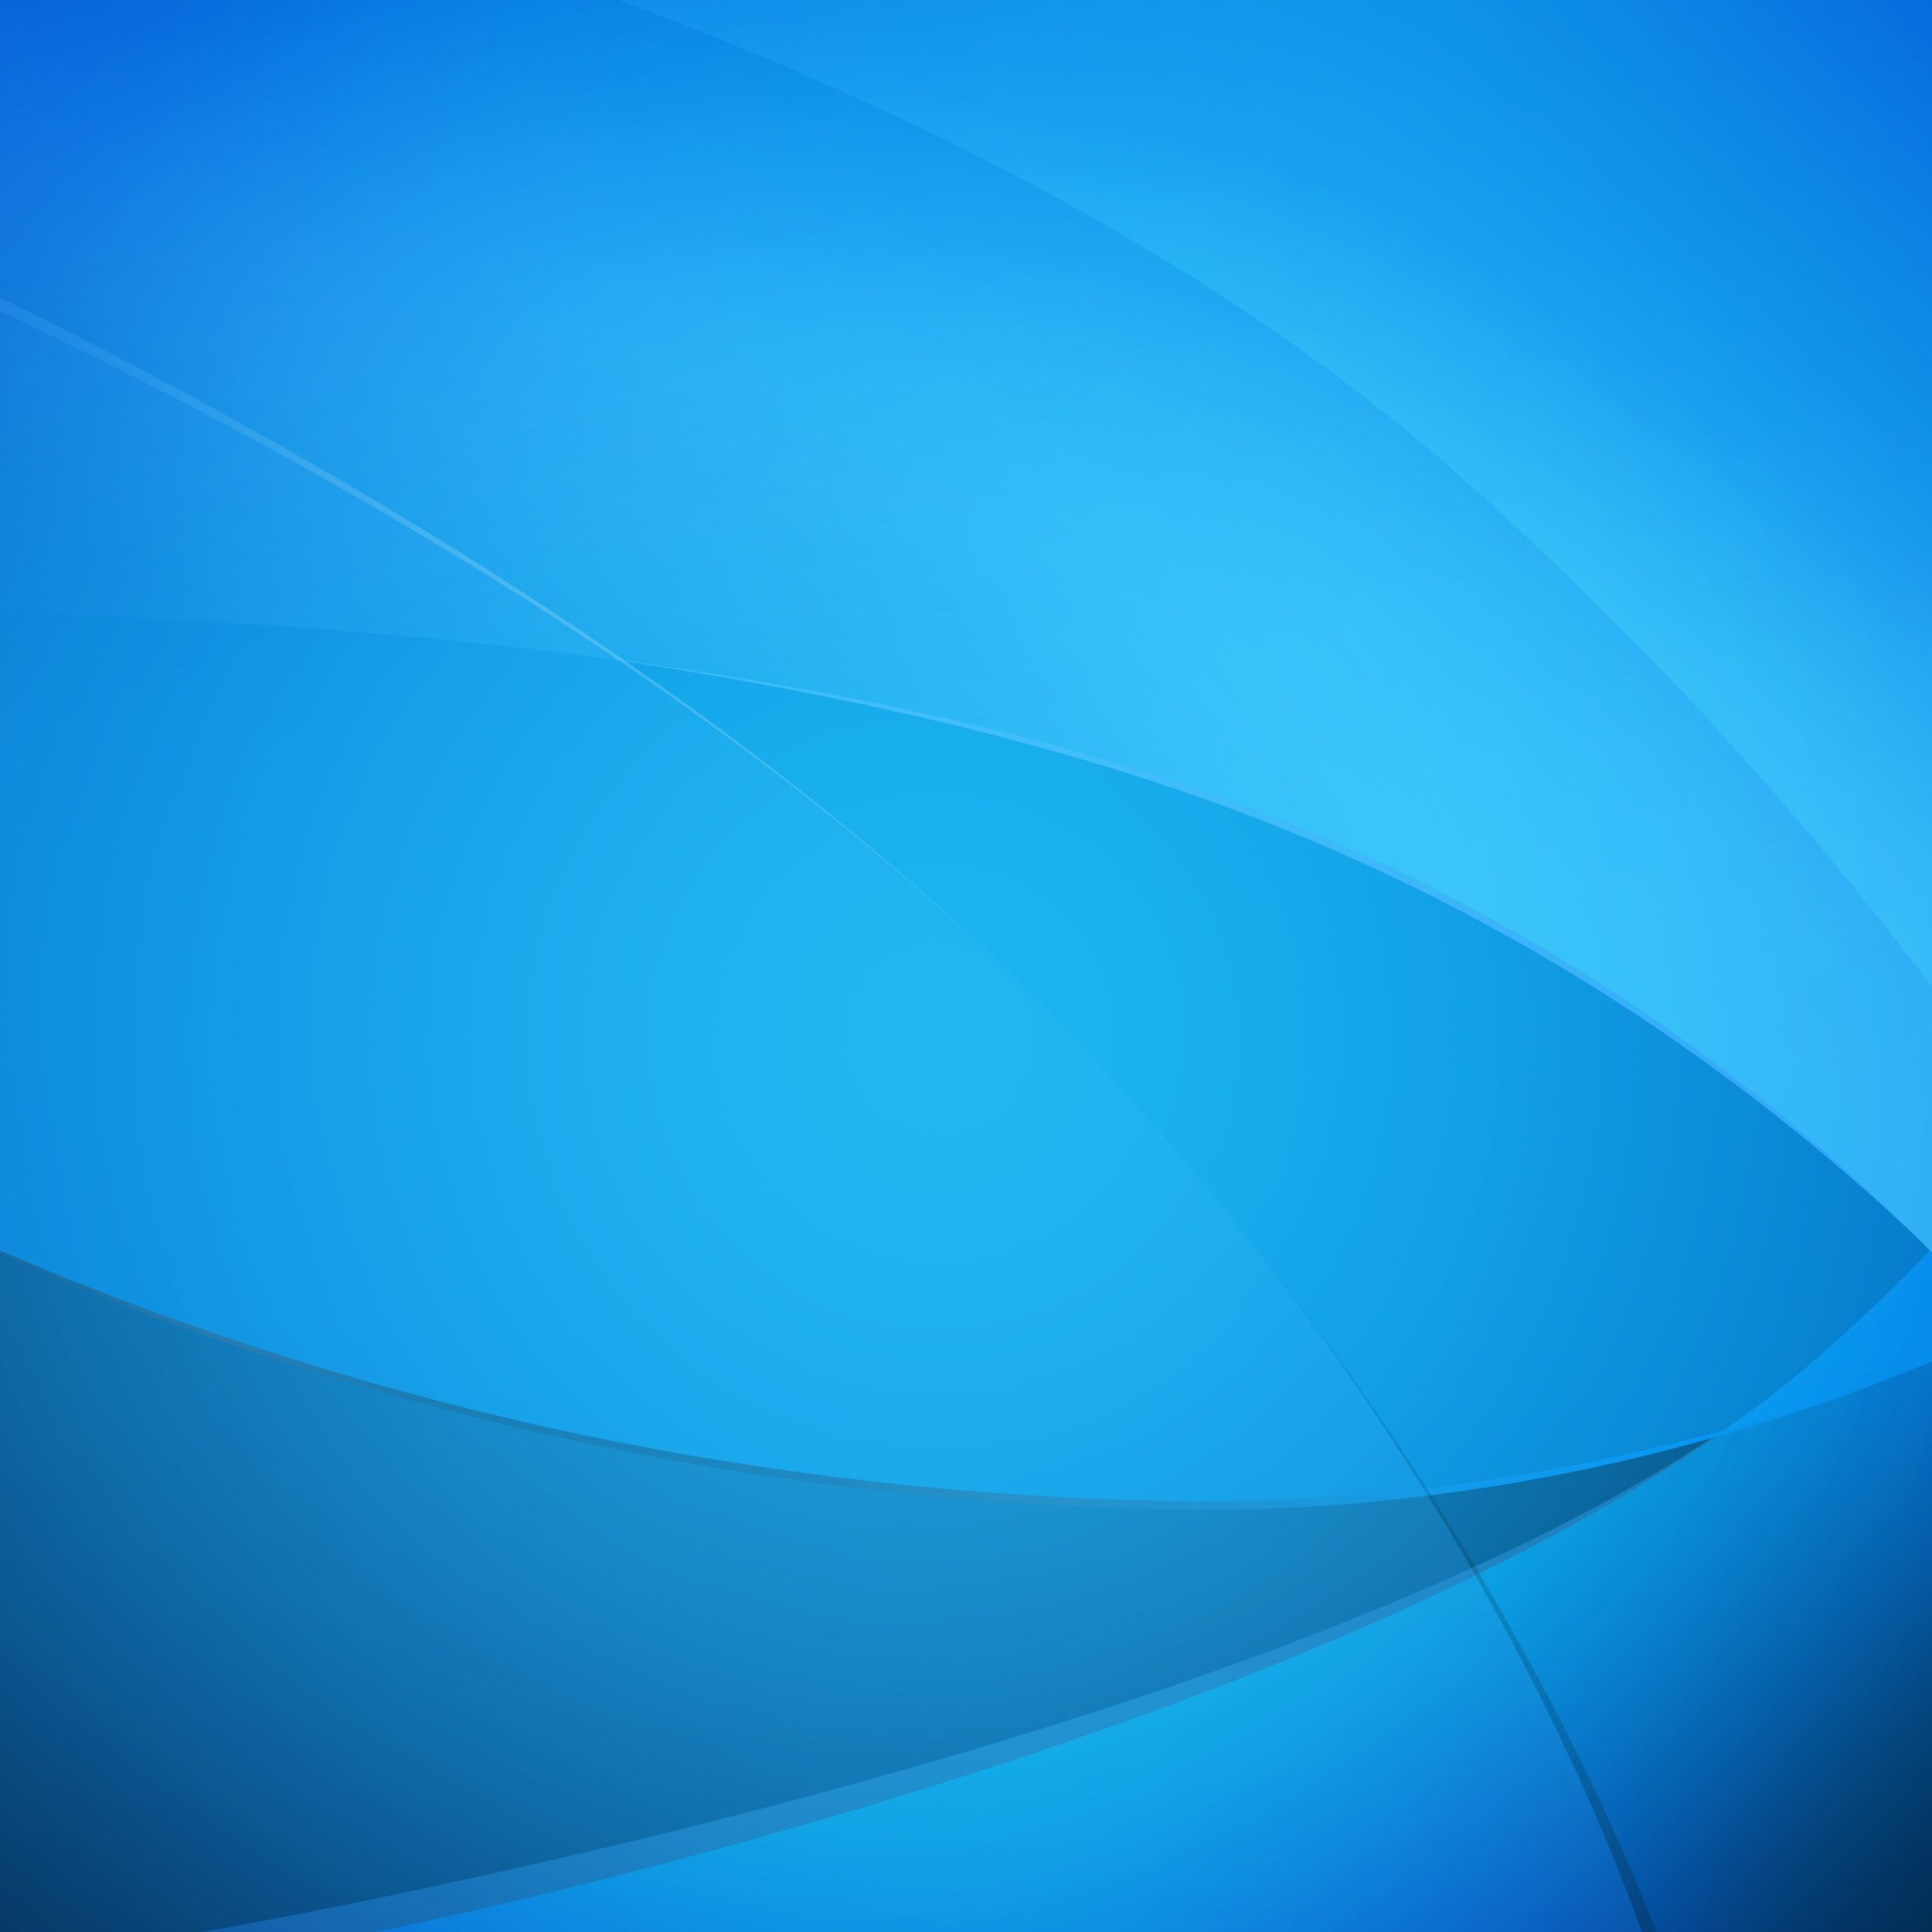 Newest iPad 3 wallpapers Abstract Wallpapers Blue Color